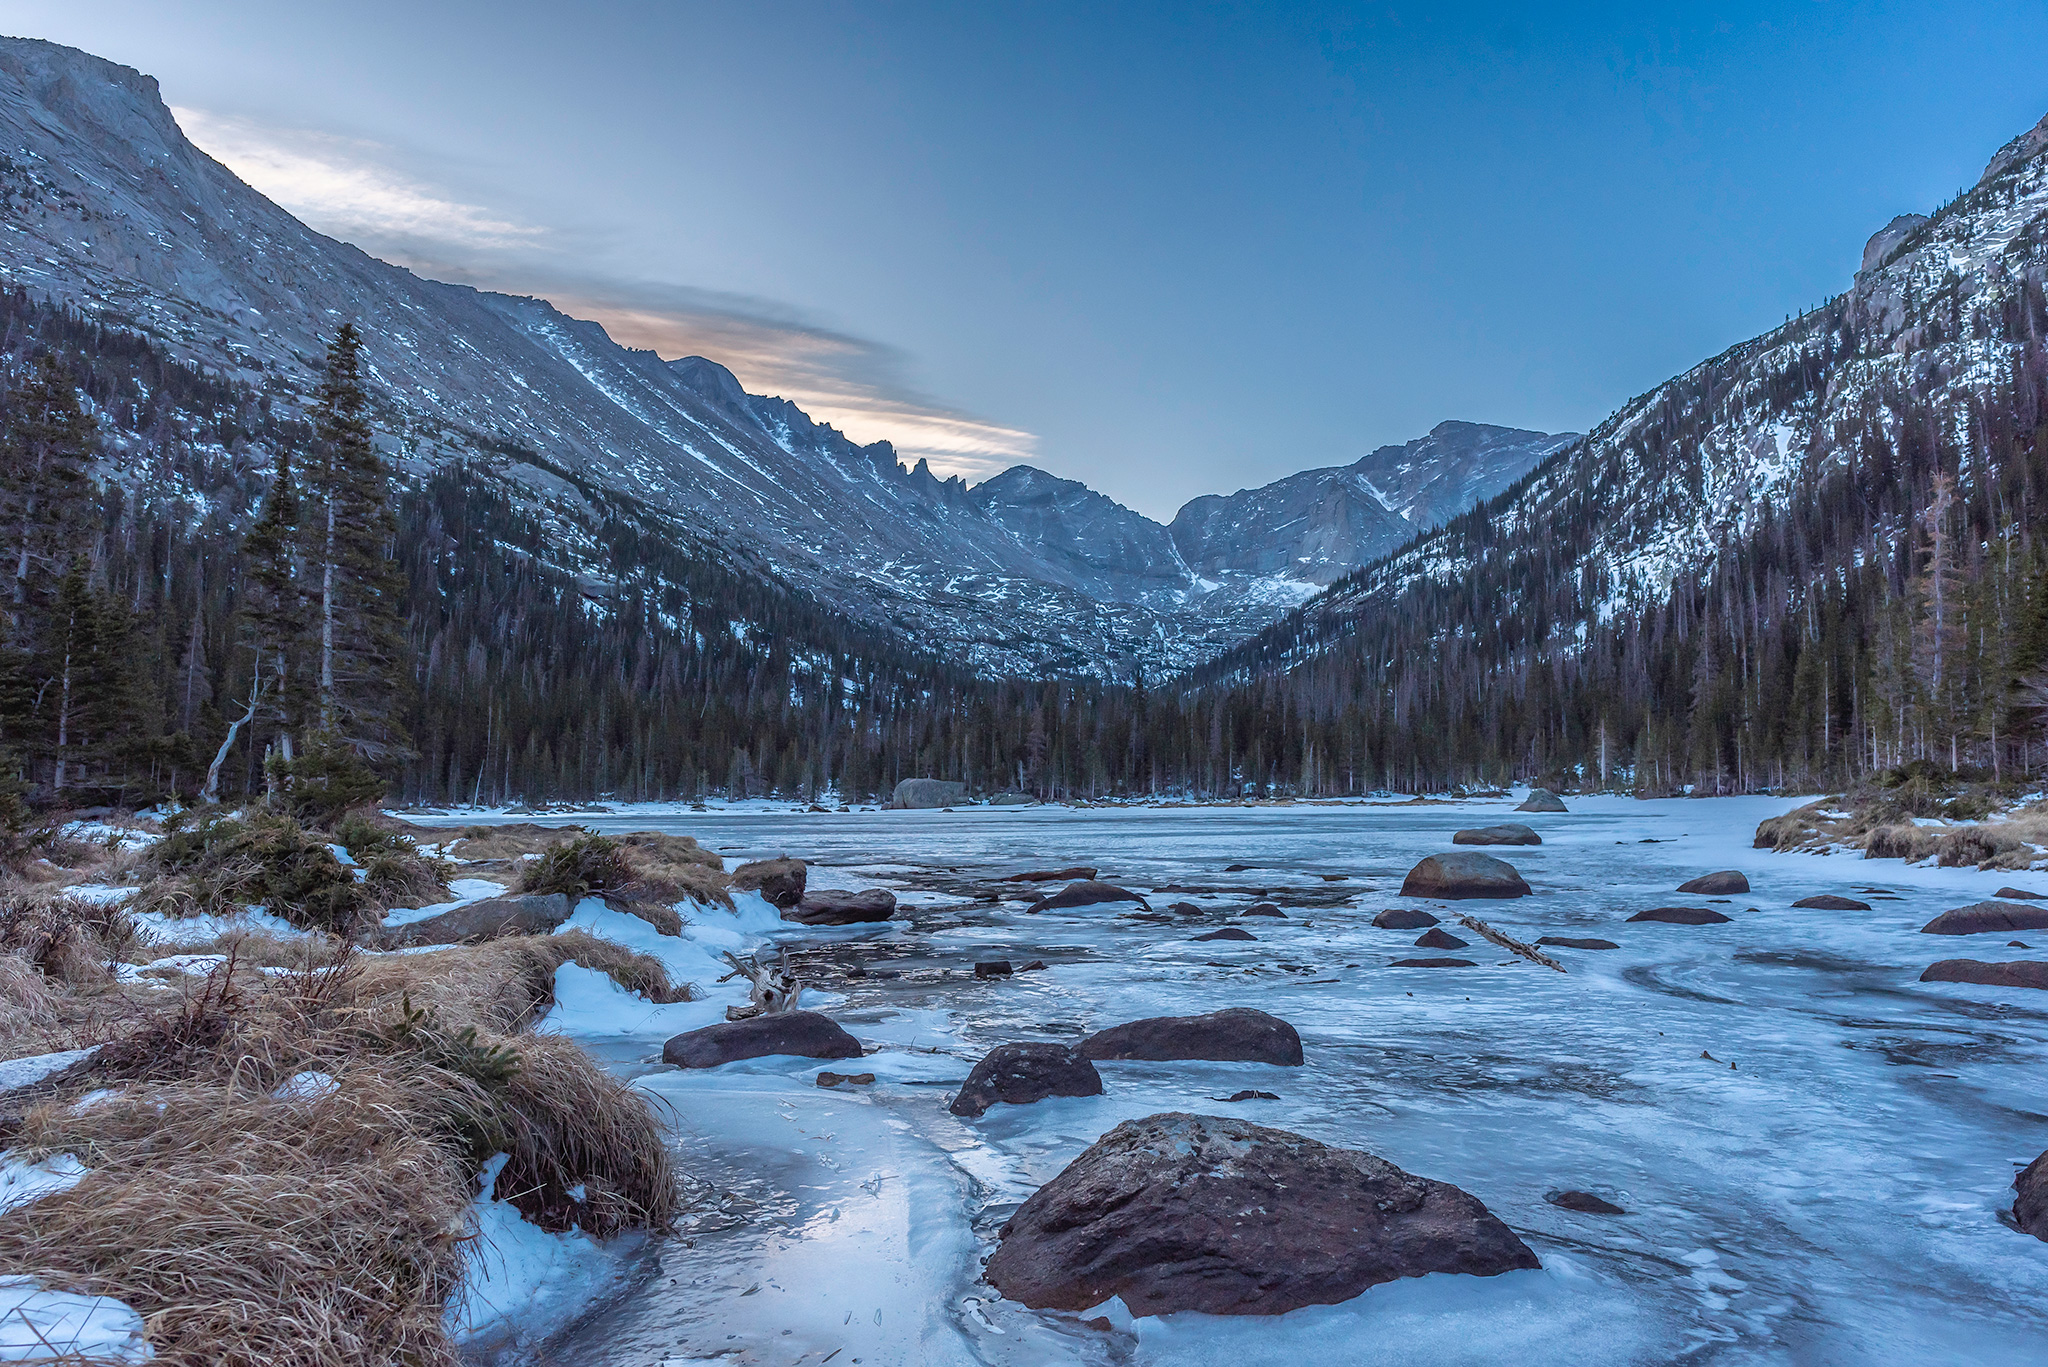 Jewel Lake with Henrys Peak in the background, frozen alpine lake in early Winter, Rocky Mountain National Park, Colorado, stream view